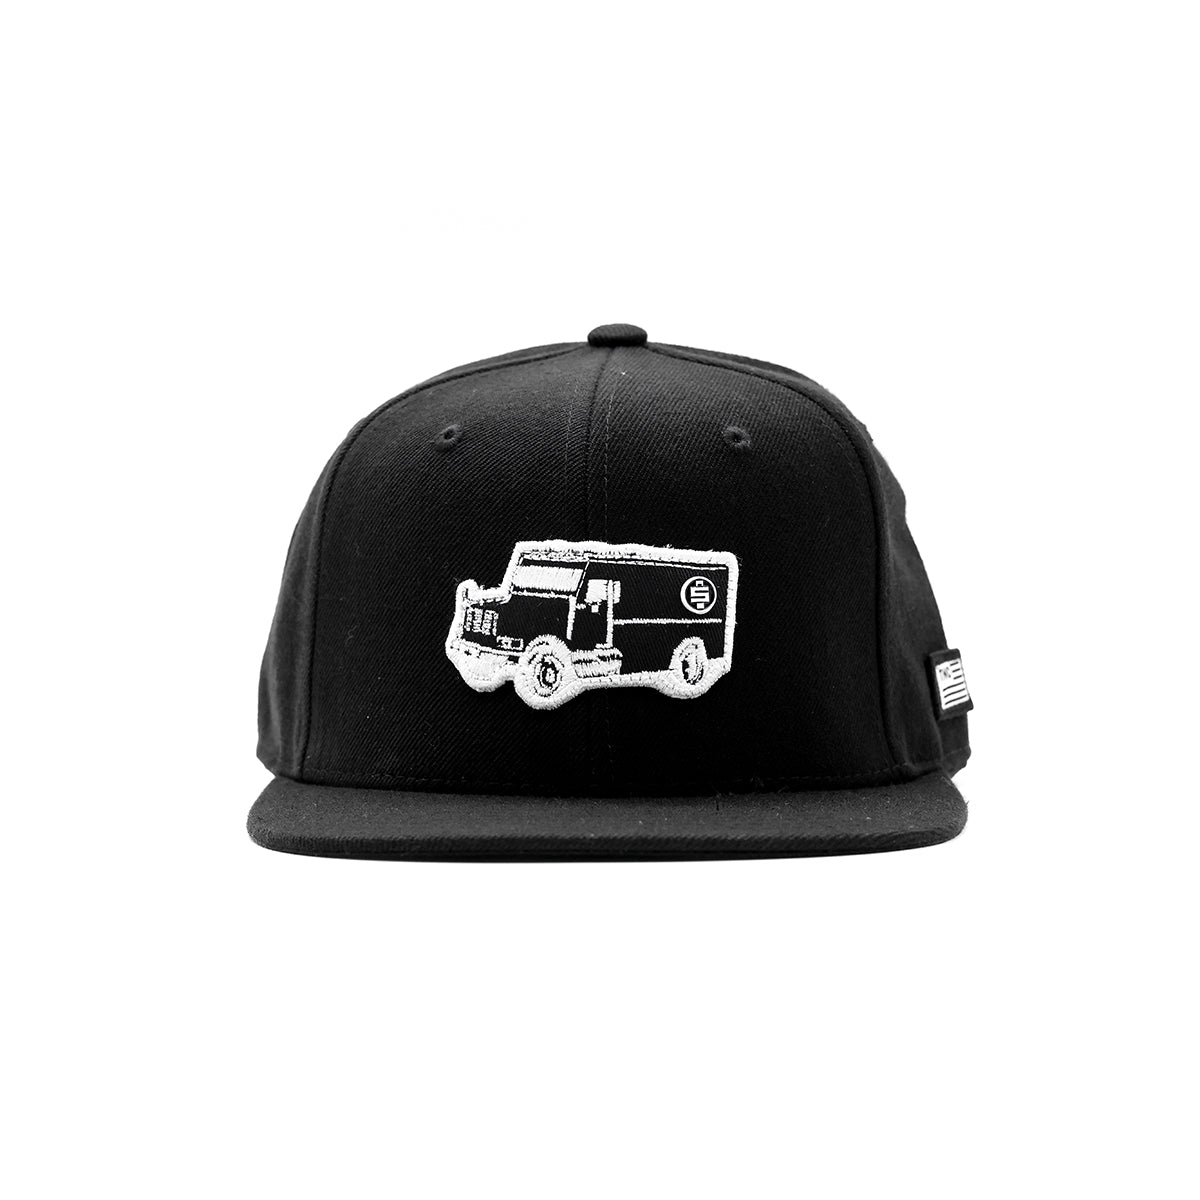 All Money In Armored Truck Limited Edition Snapback - Black/White - Front